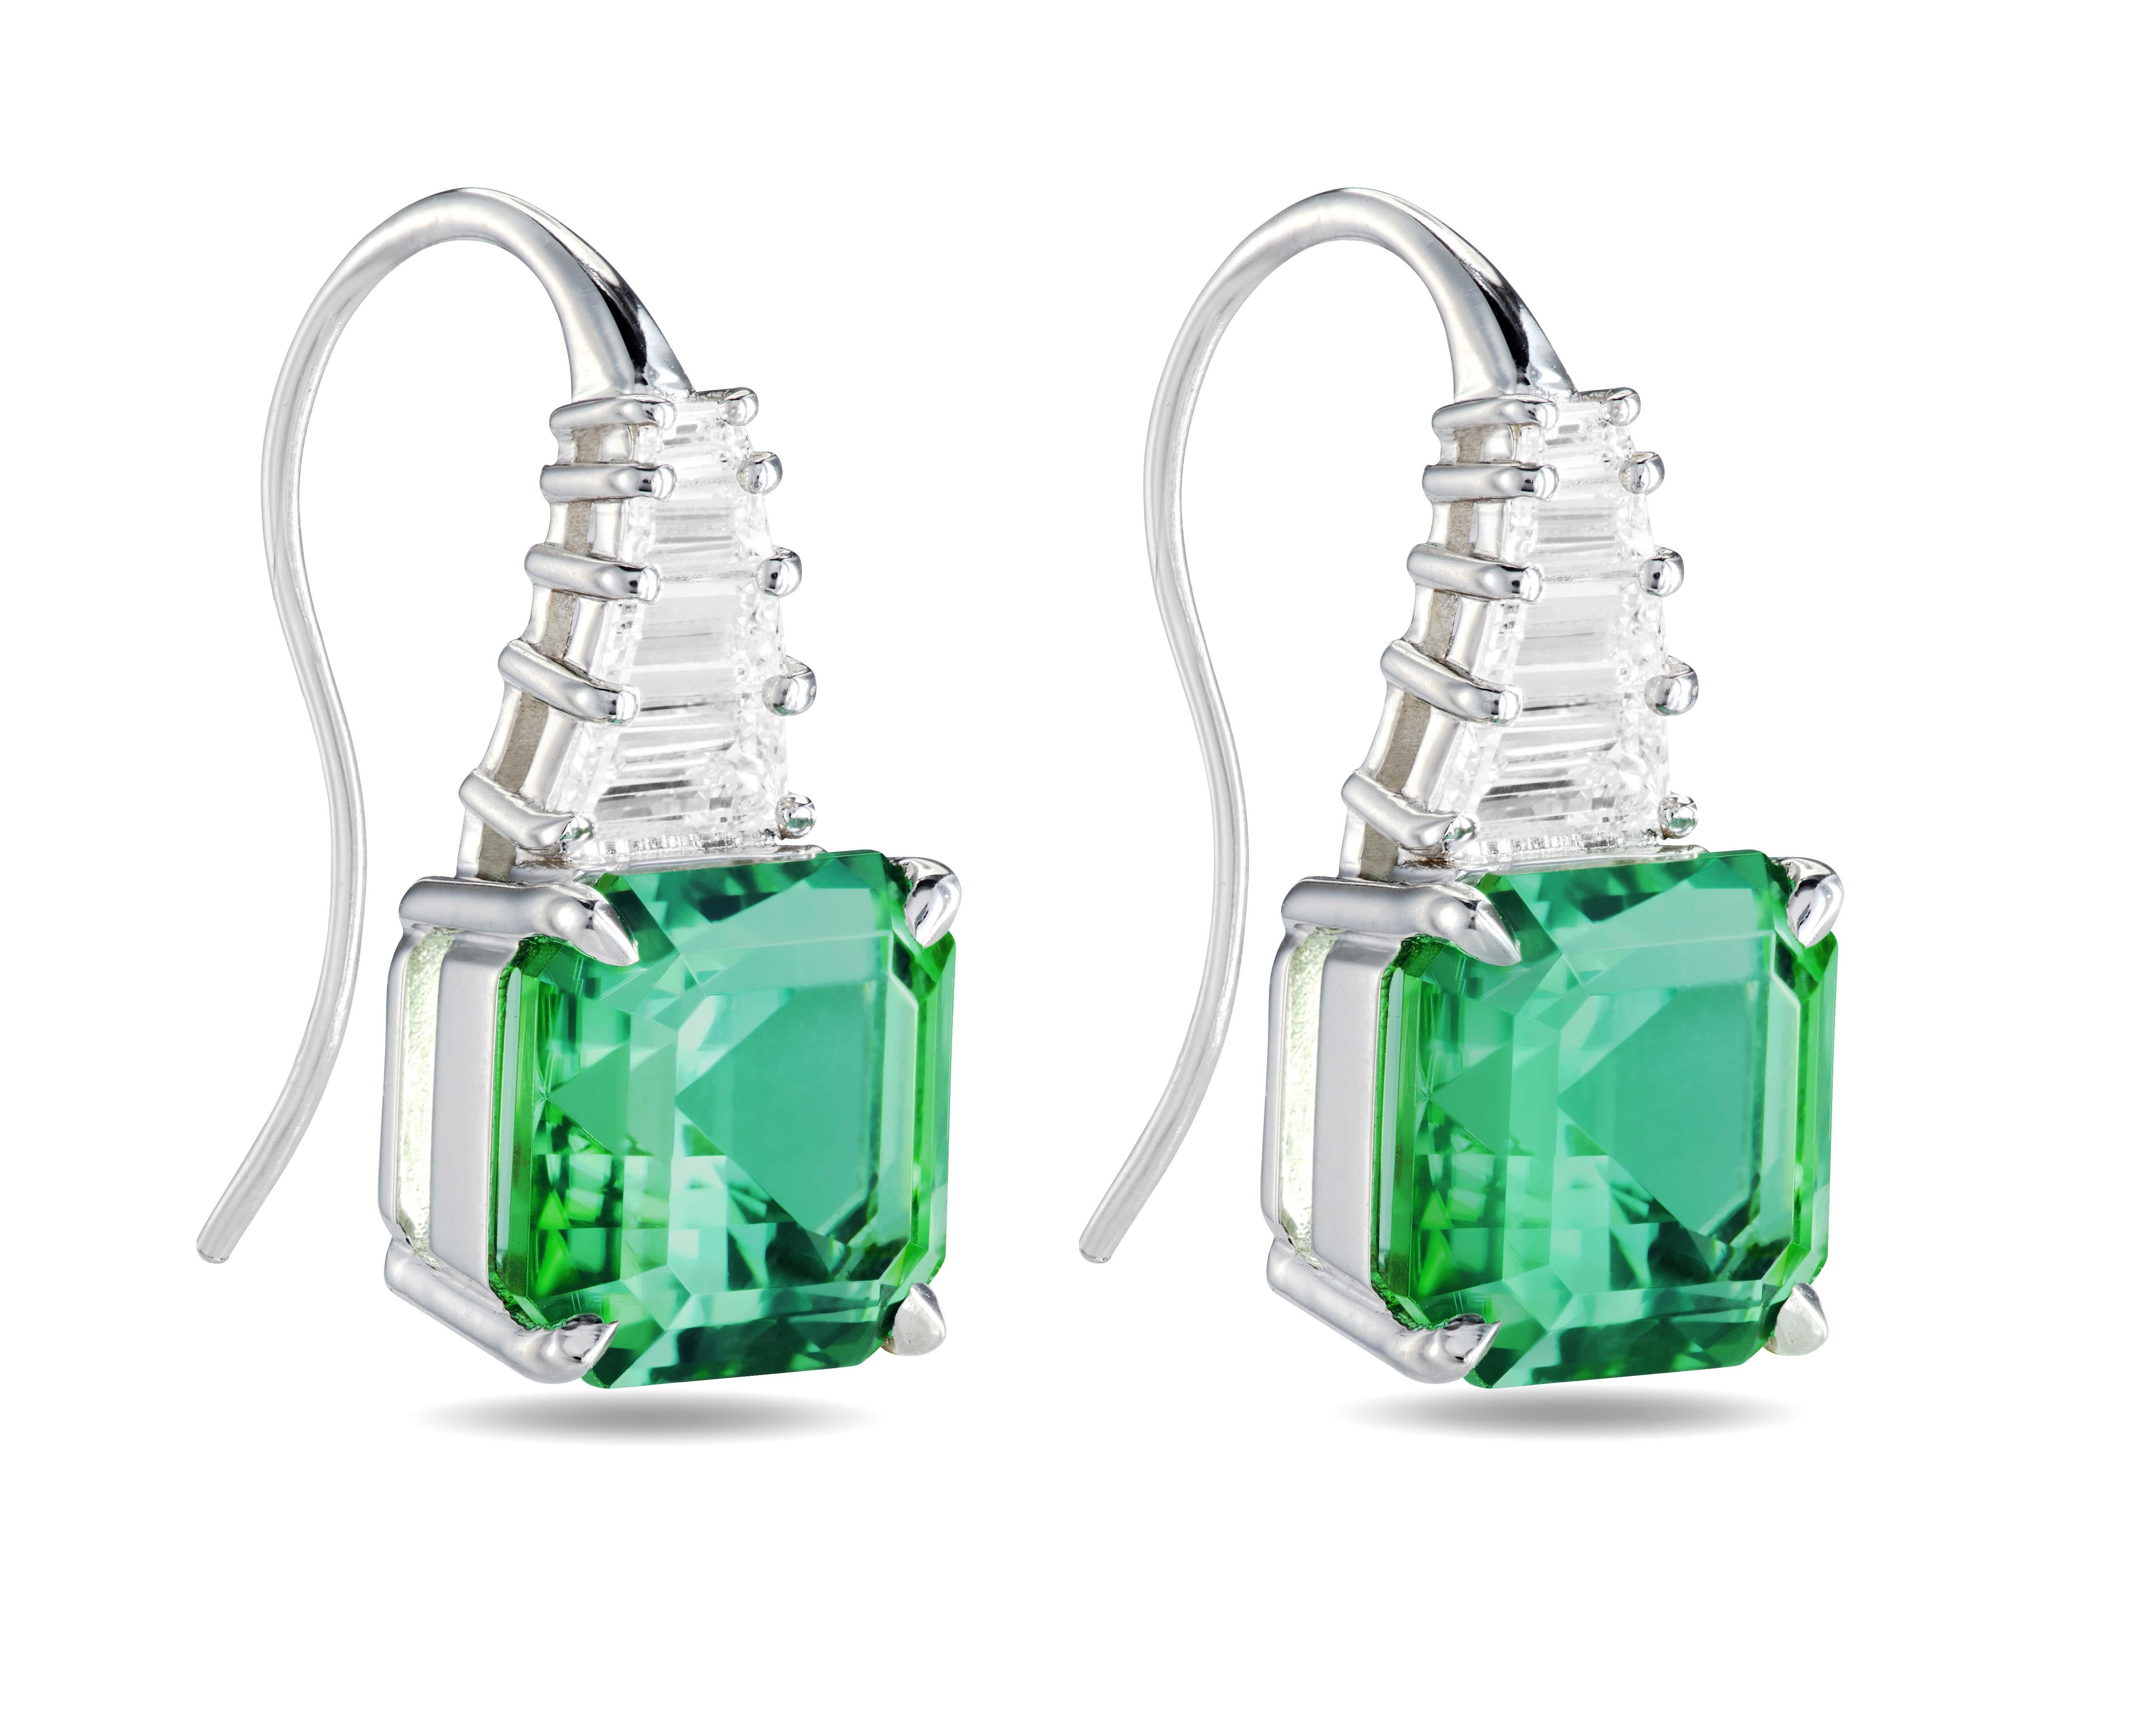 From our One-of-a-Kind collection, each earring is handcrafted in an 18K white gold and set with one 3.2 ct. asscher-cut vibrant mint green Tourmaline and four graduated trapeze-cut colorless diamonds.
Total diamond weight is approximately 0.58